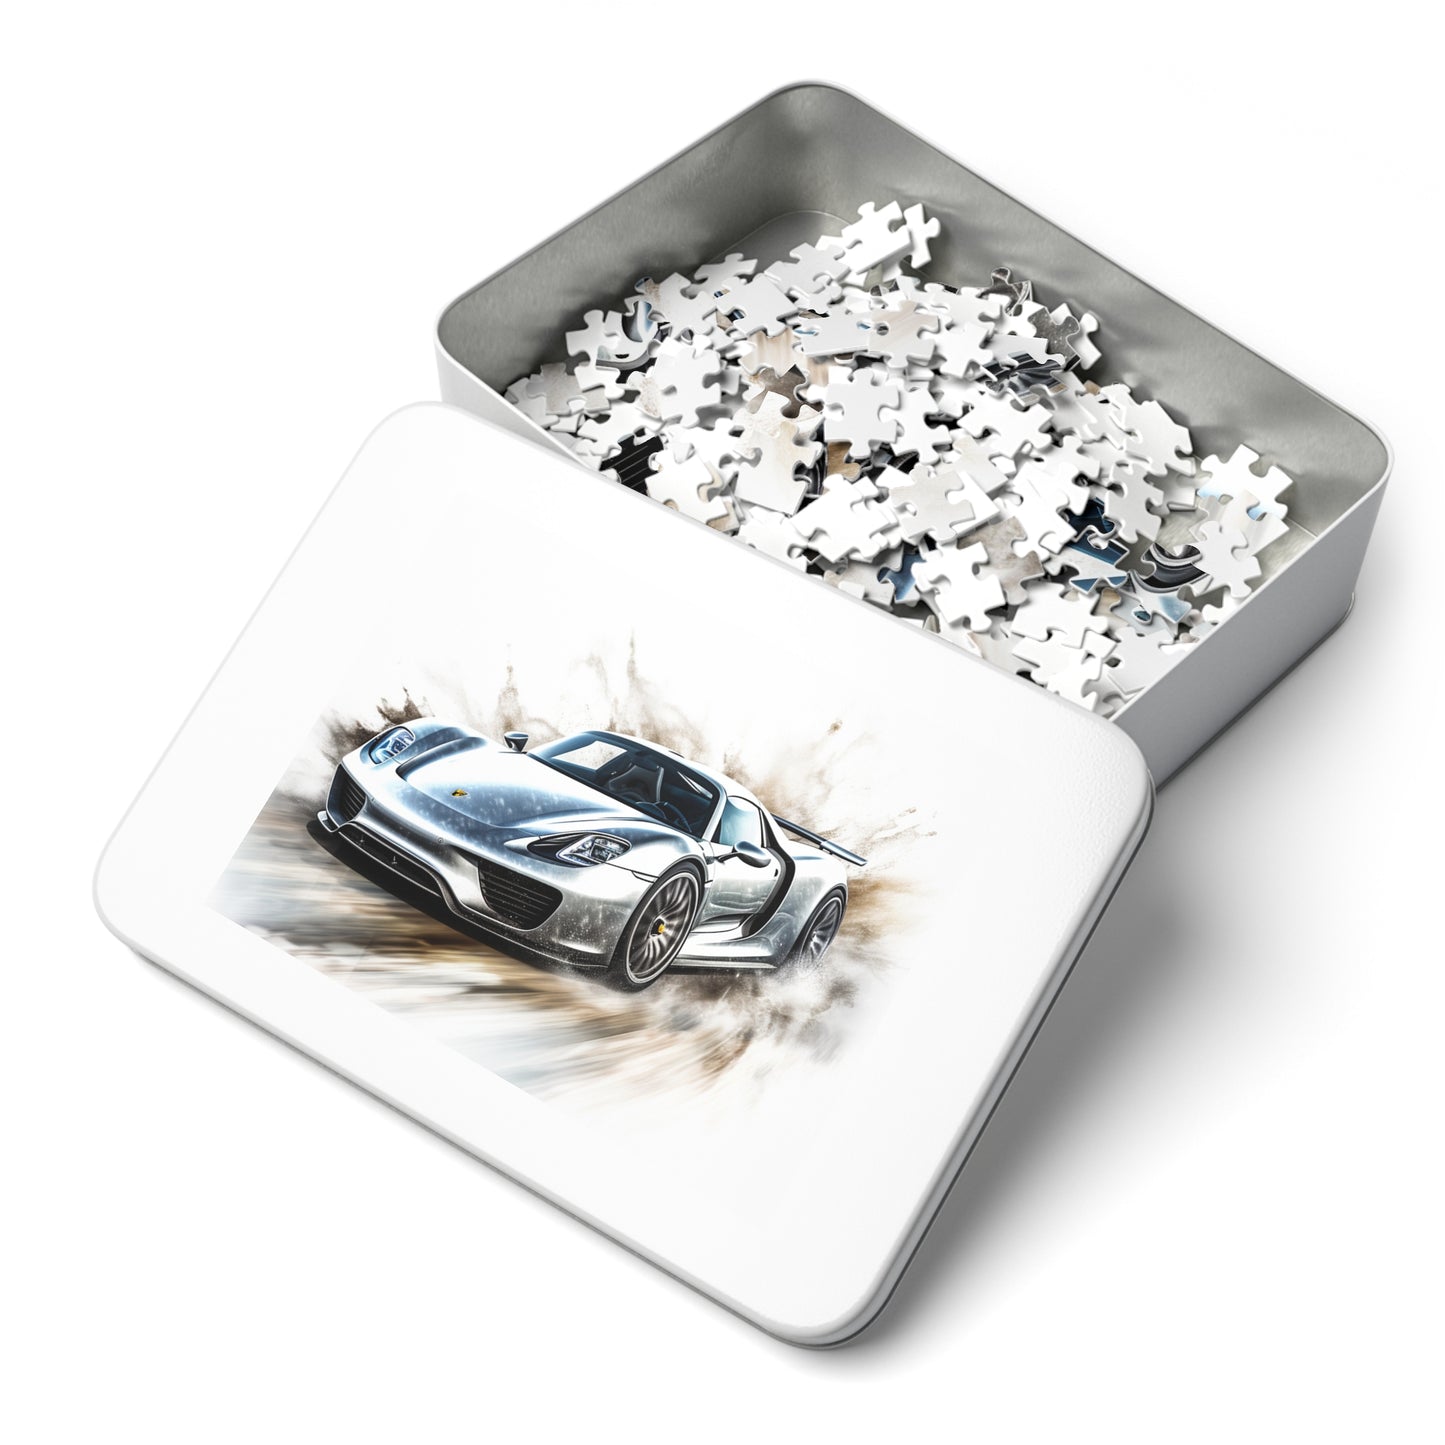 Jigsaw Puzzle (30, 110, 252, 500,1000-Piece) 918 Spyder white background driving fast with water splashing 2